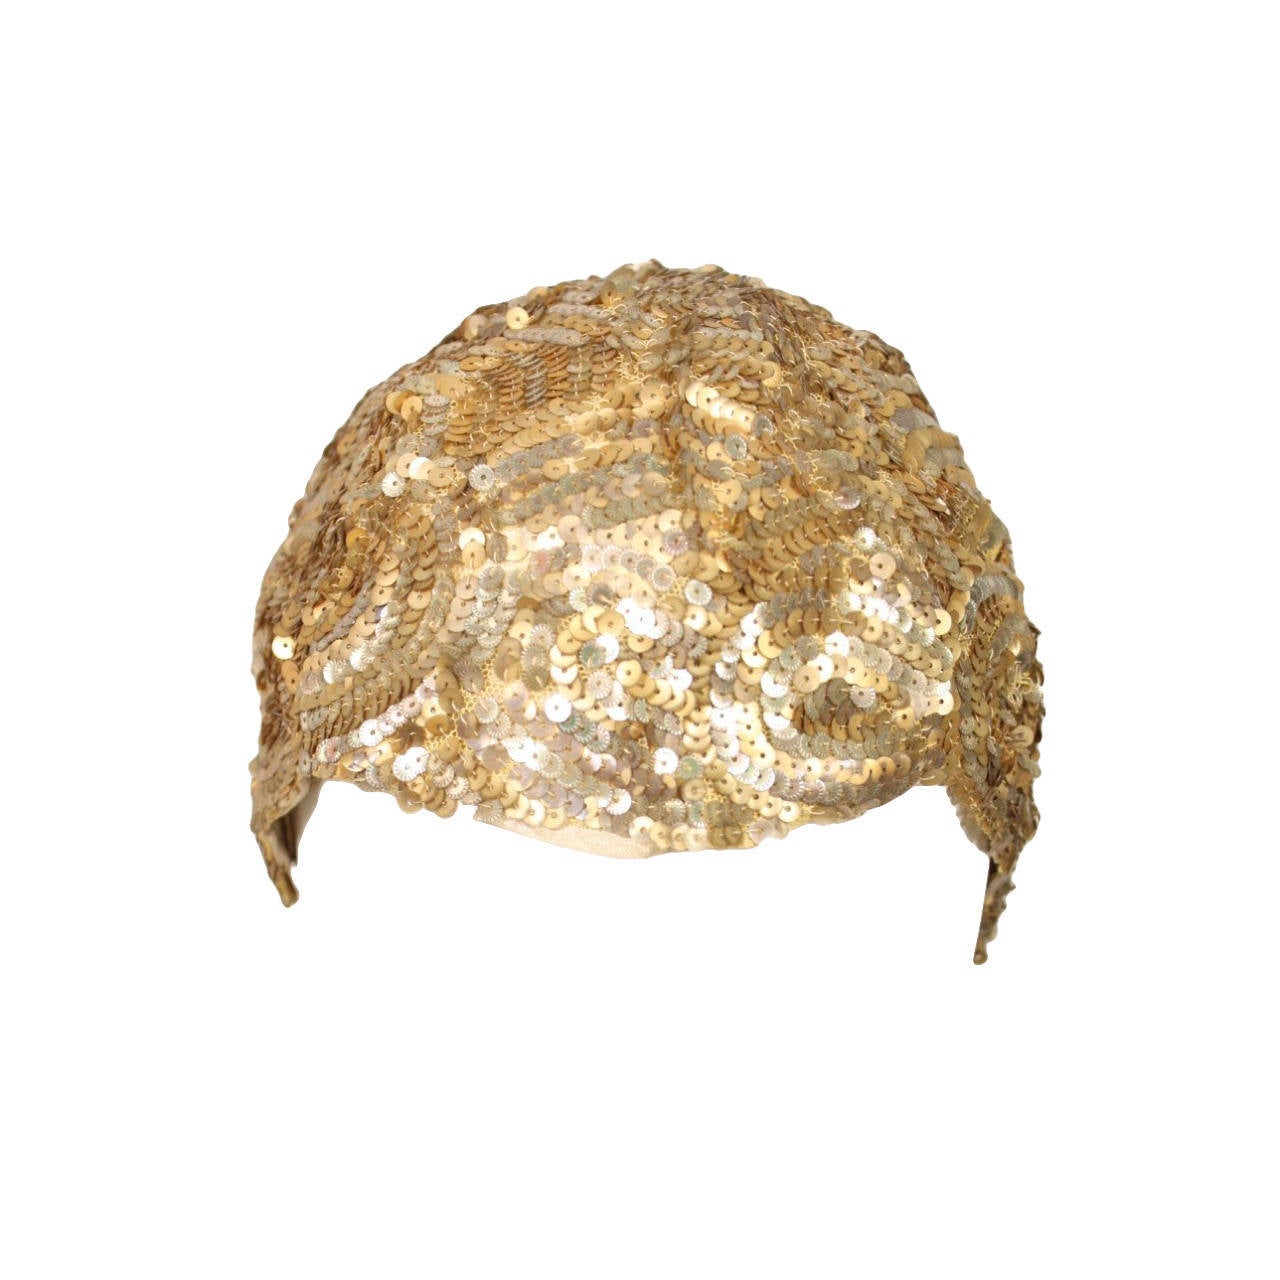 1930's Skull Cap Encrusted with Gold Sequins For Sale at 1stdibs